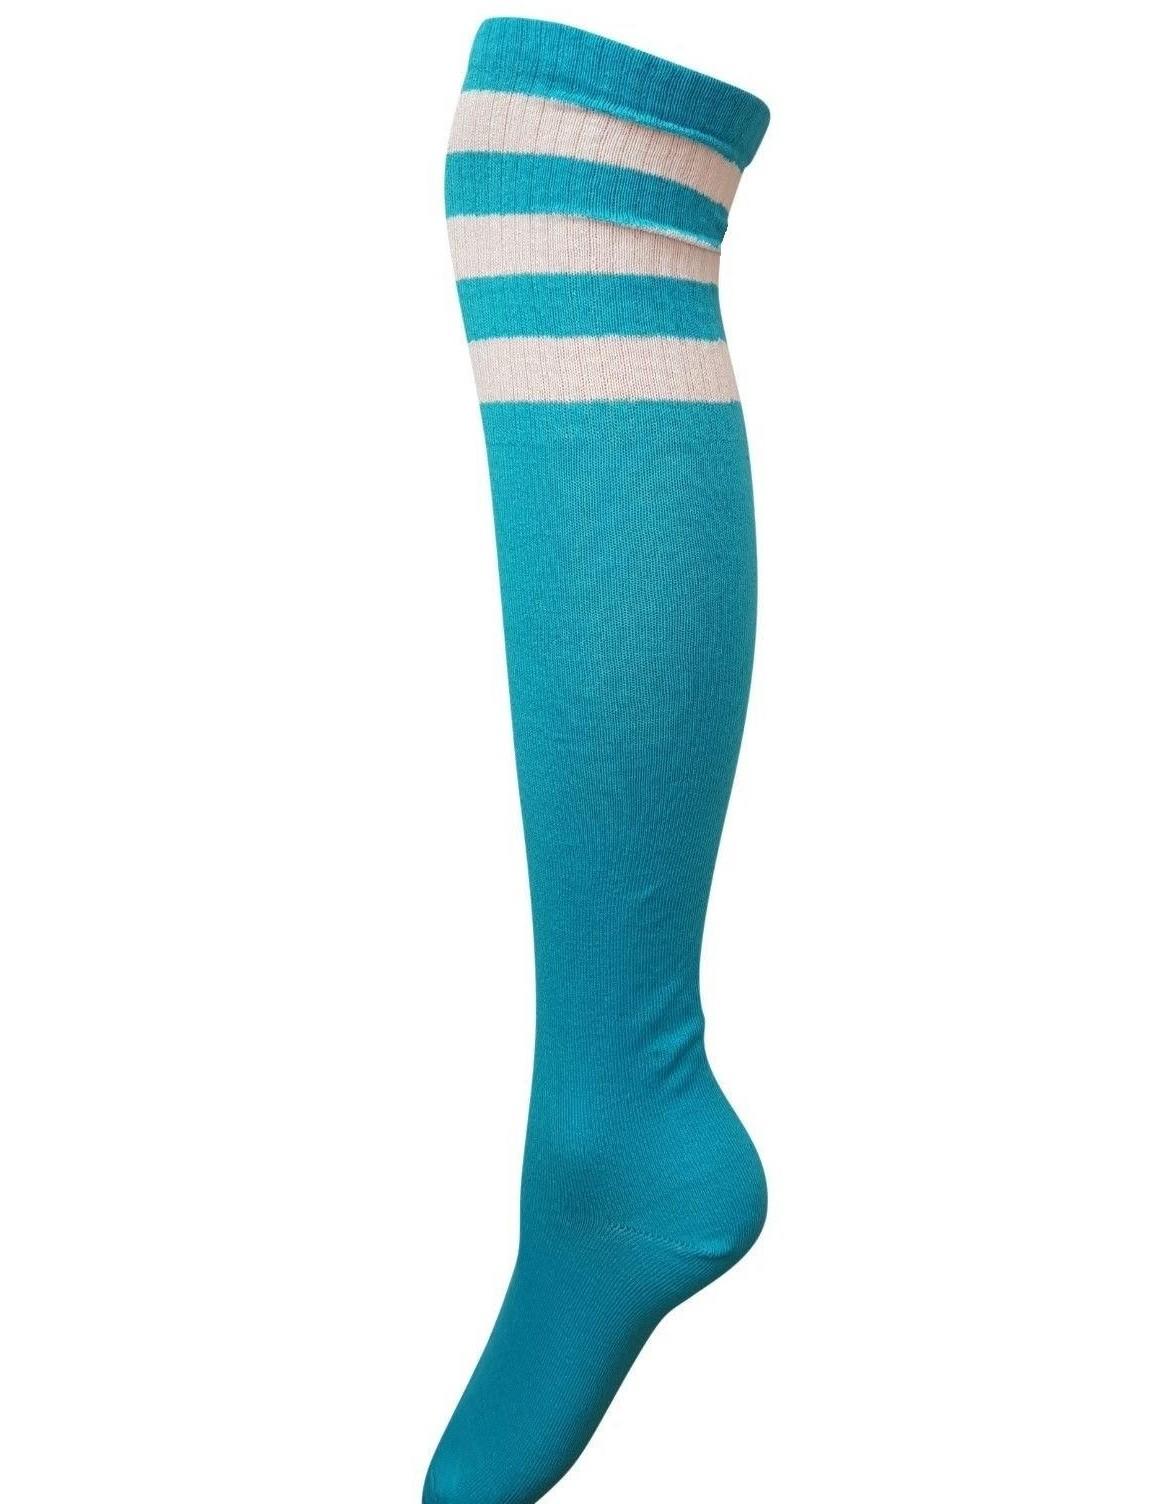 Women's Knee High Athletic Referee Style Socks - Kiss Tights